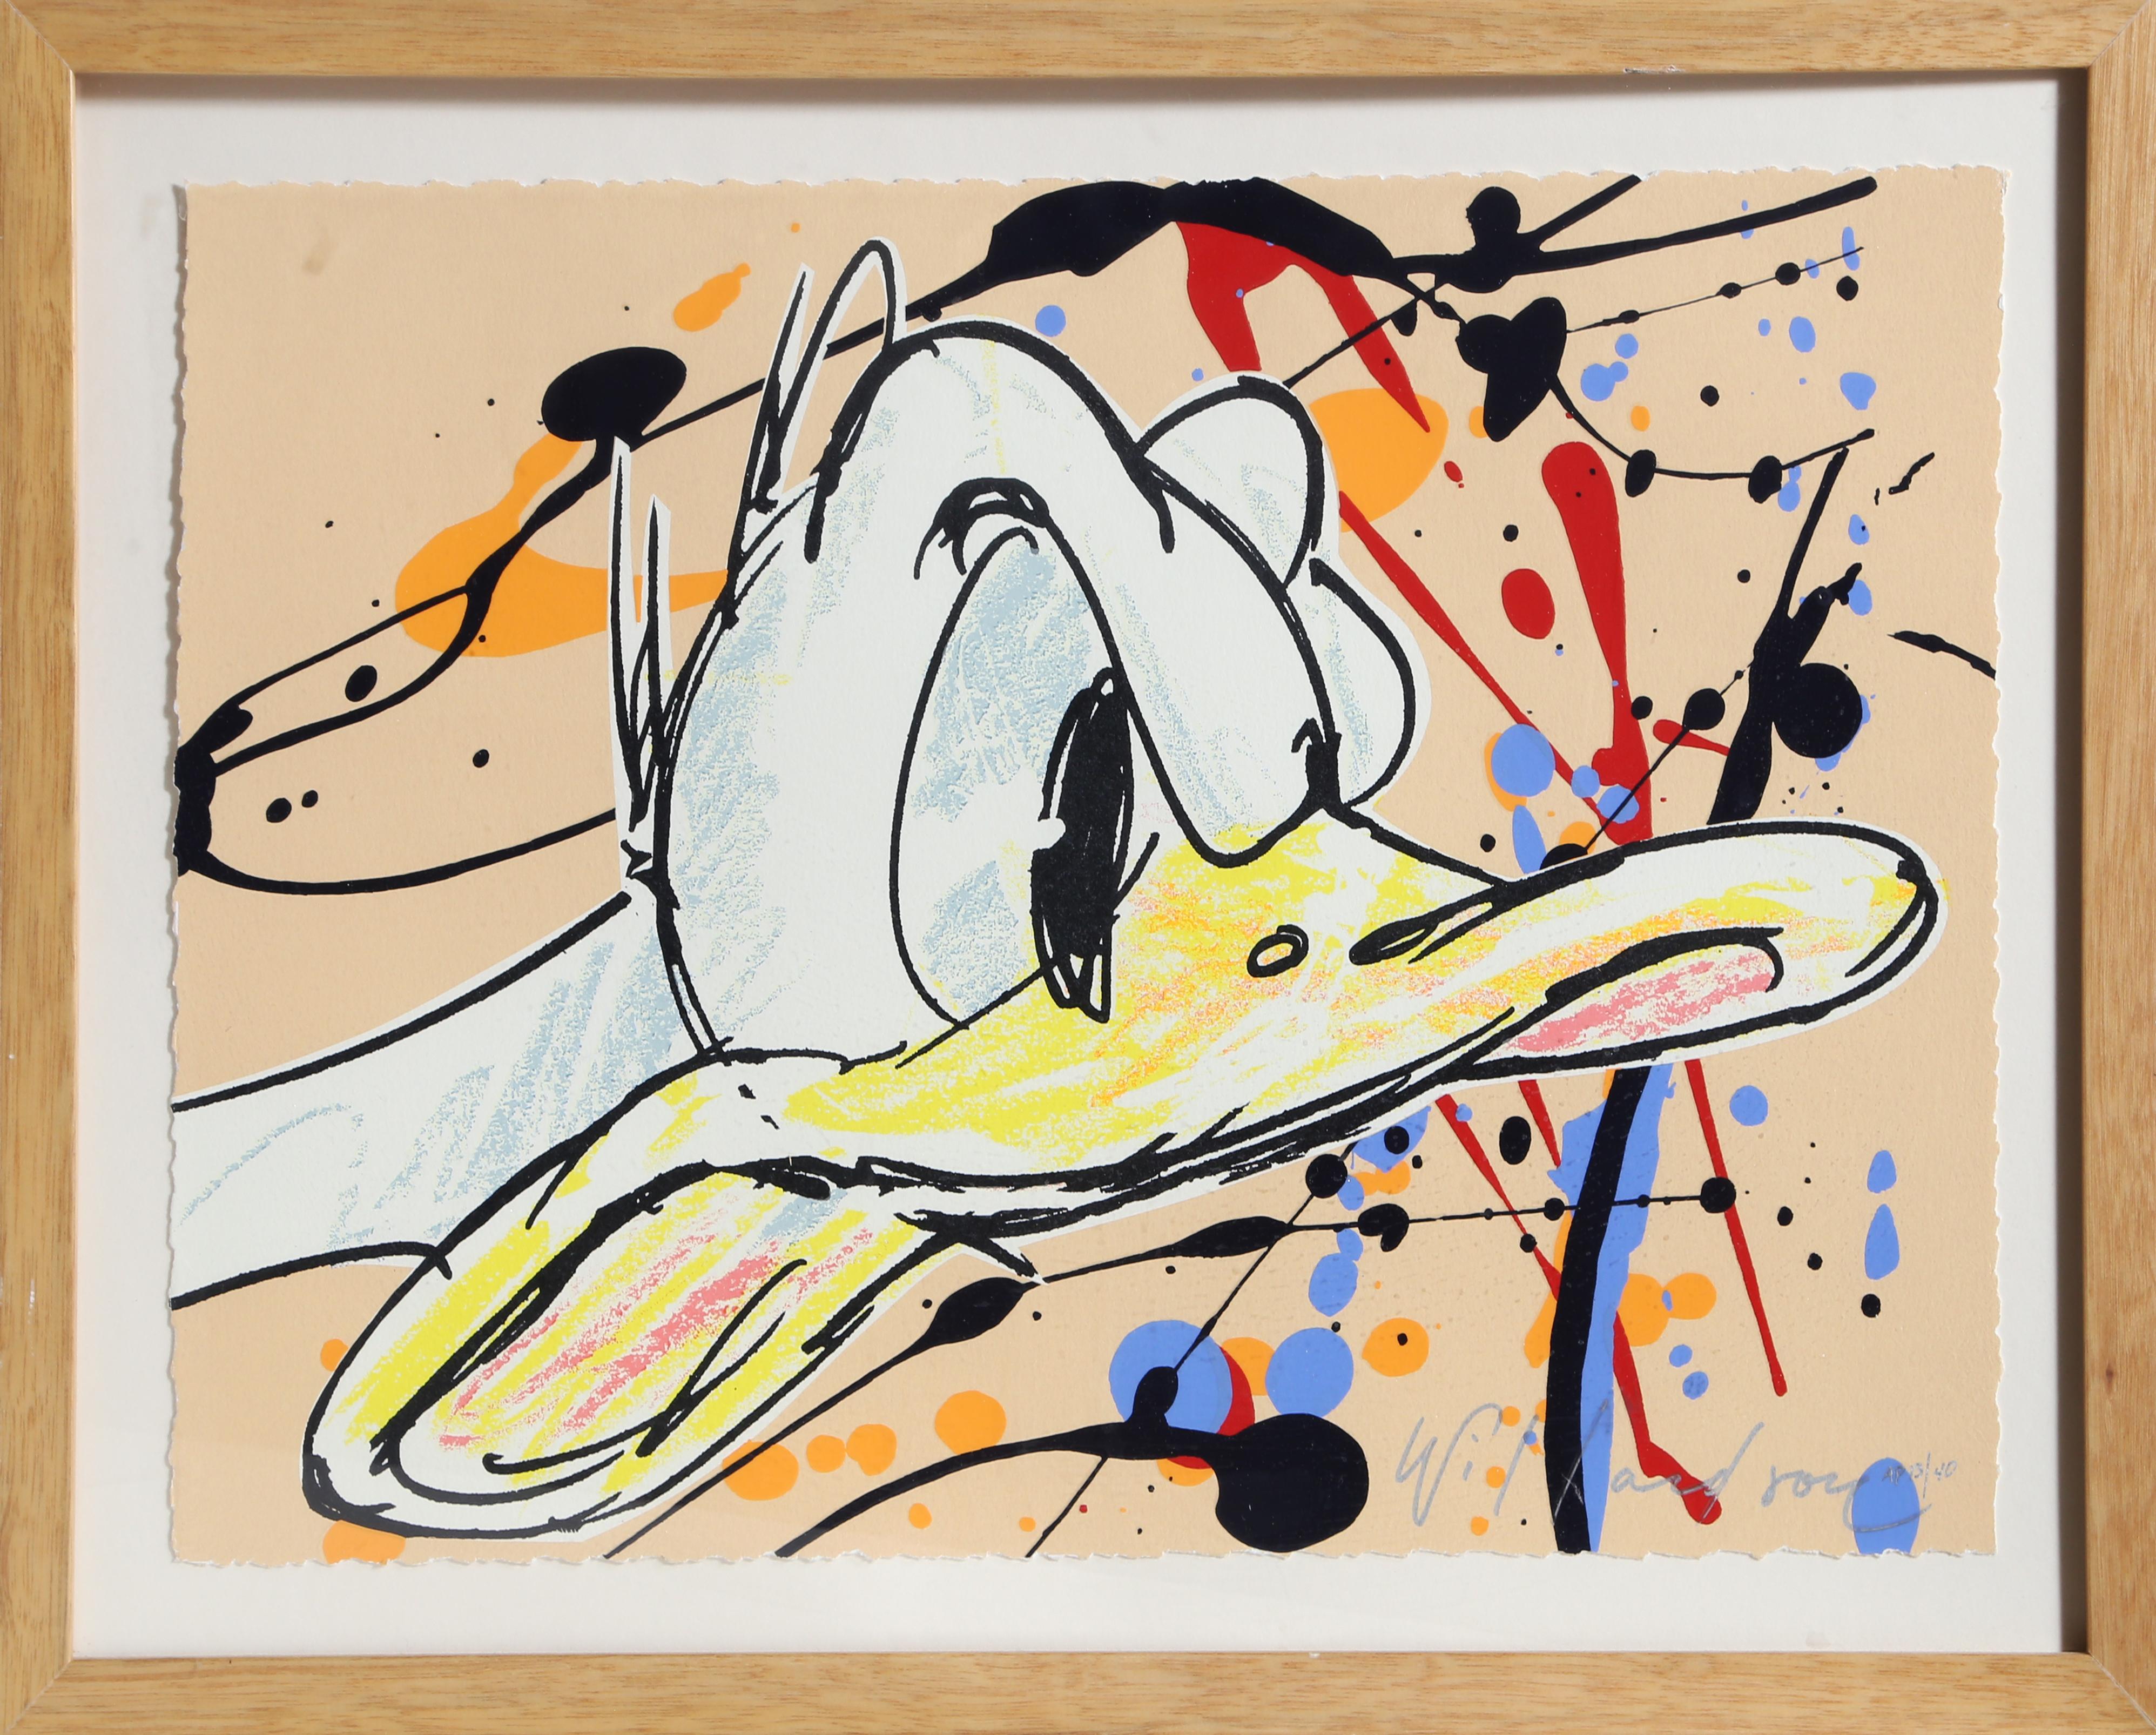 Donald Duck caught mid-ranting and raving. He is drawn in an unfinished, working sketch style on top of a background reminiscent of Abstract Expressionist paintings by Jackson Pollock. This lithograph is signed by the artist and nicely framed.

The